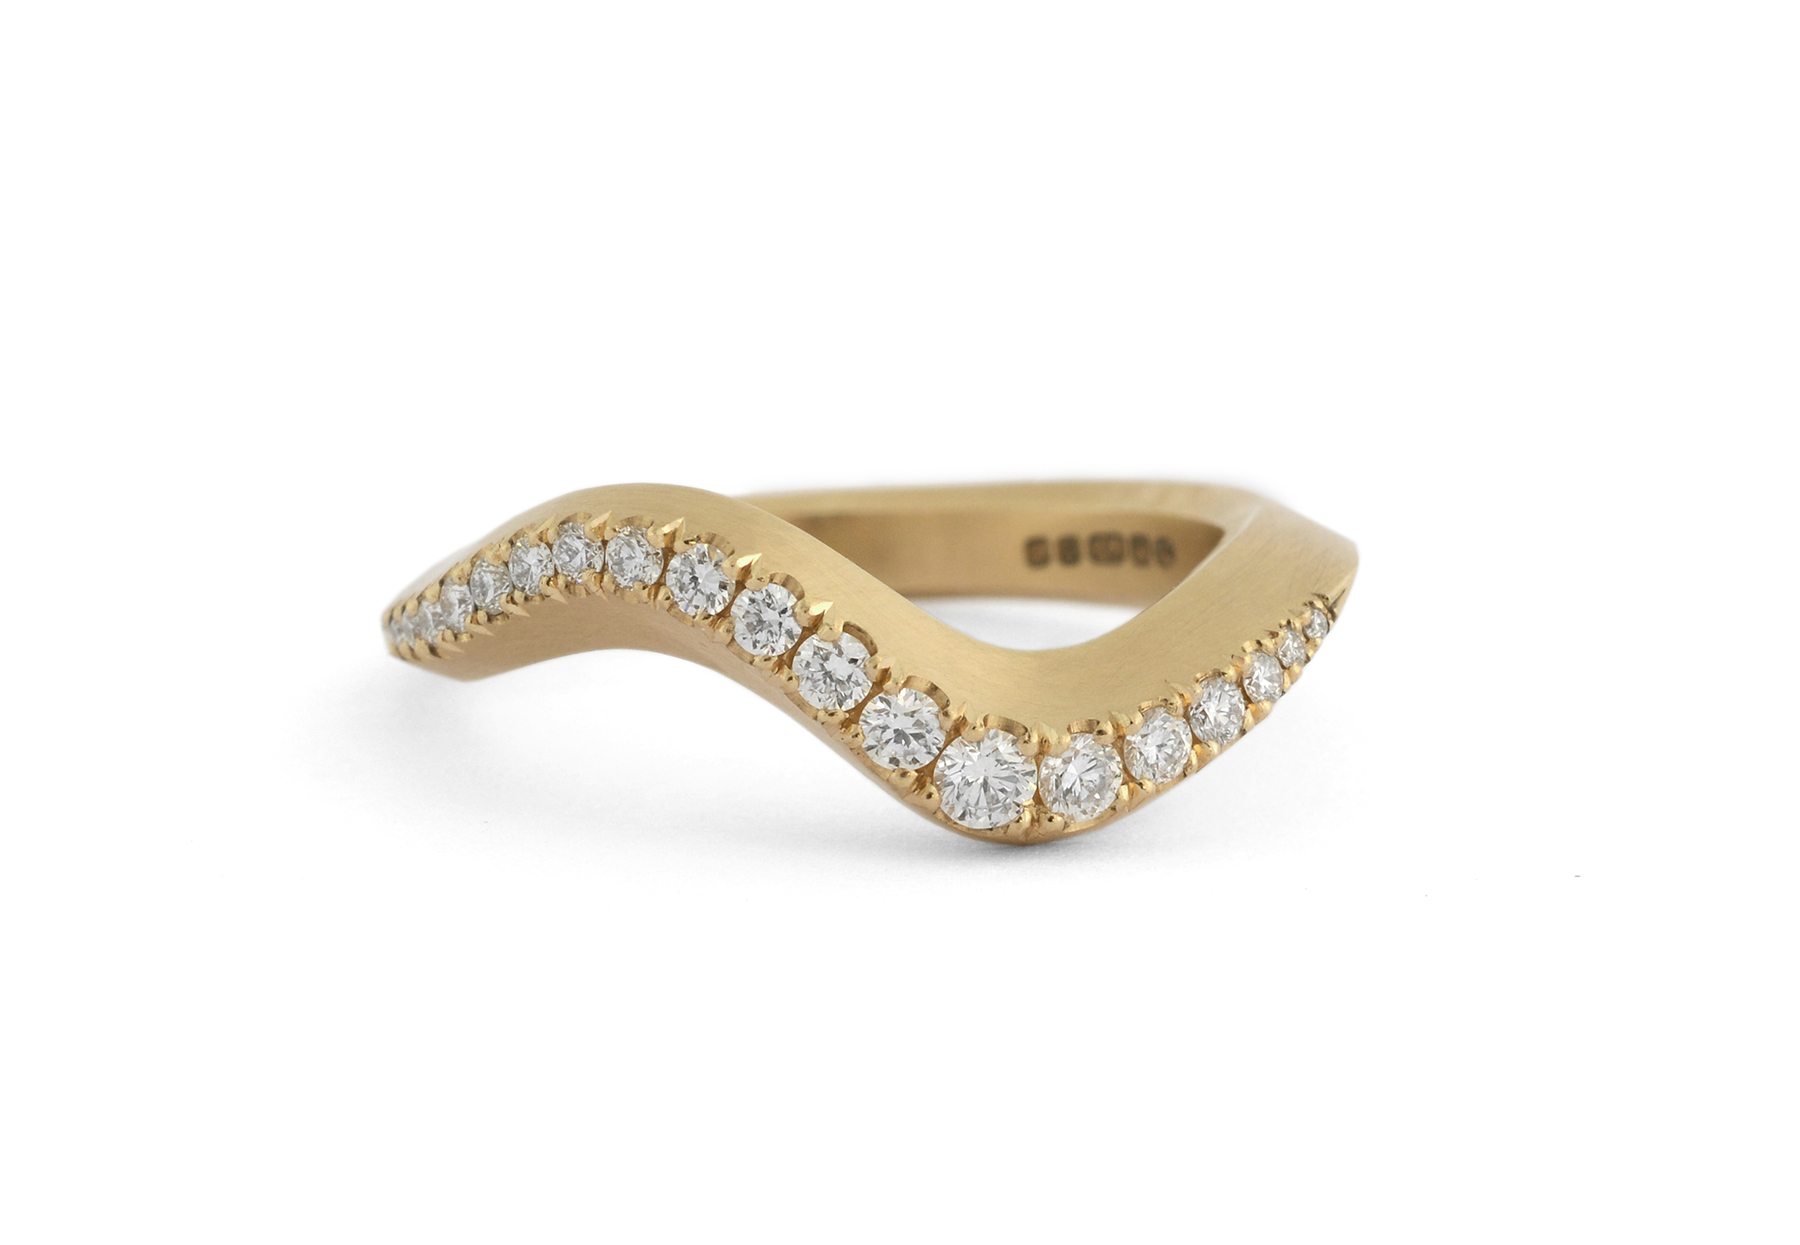 Arris band ring yellow gold with castelle white diamonds